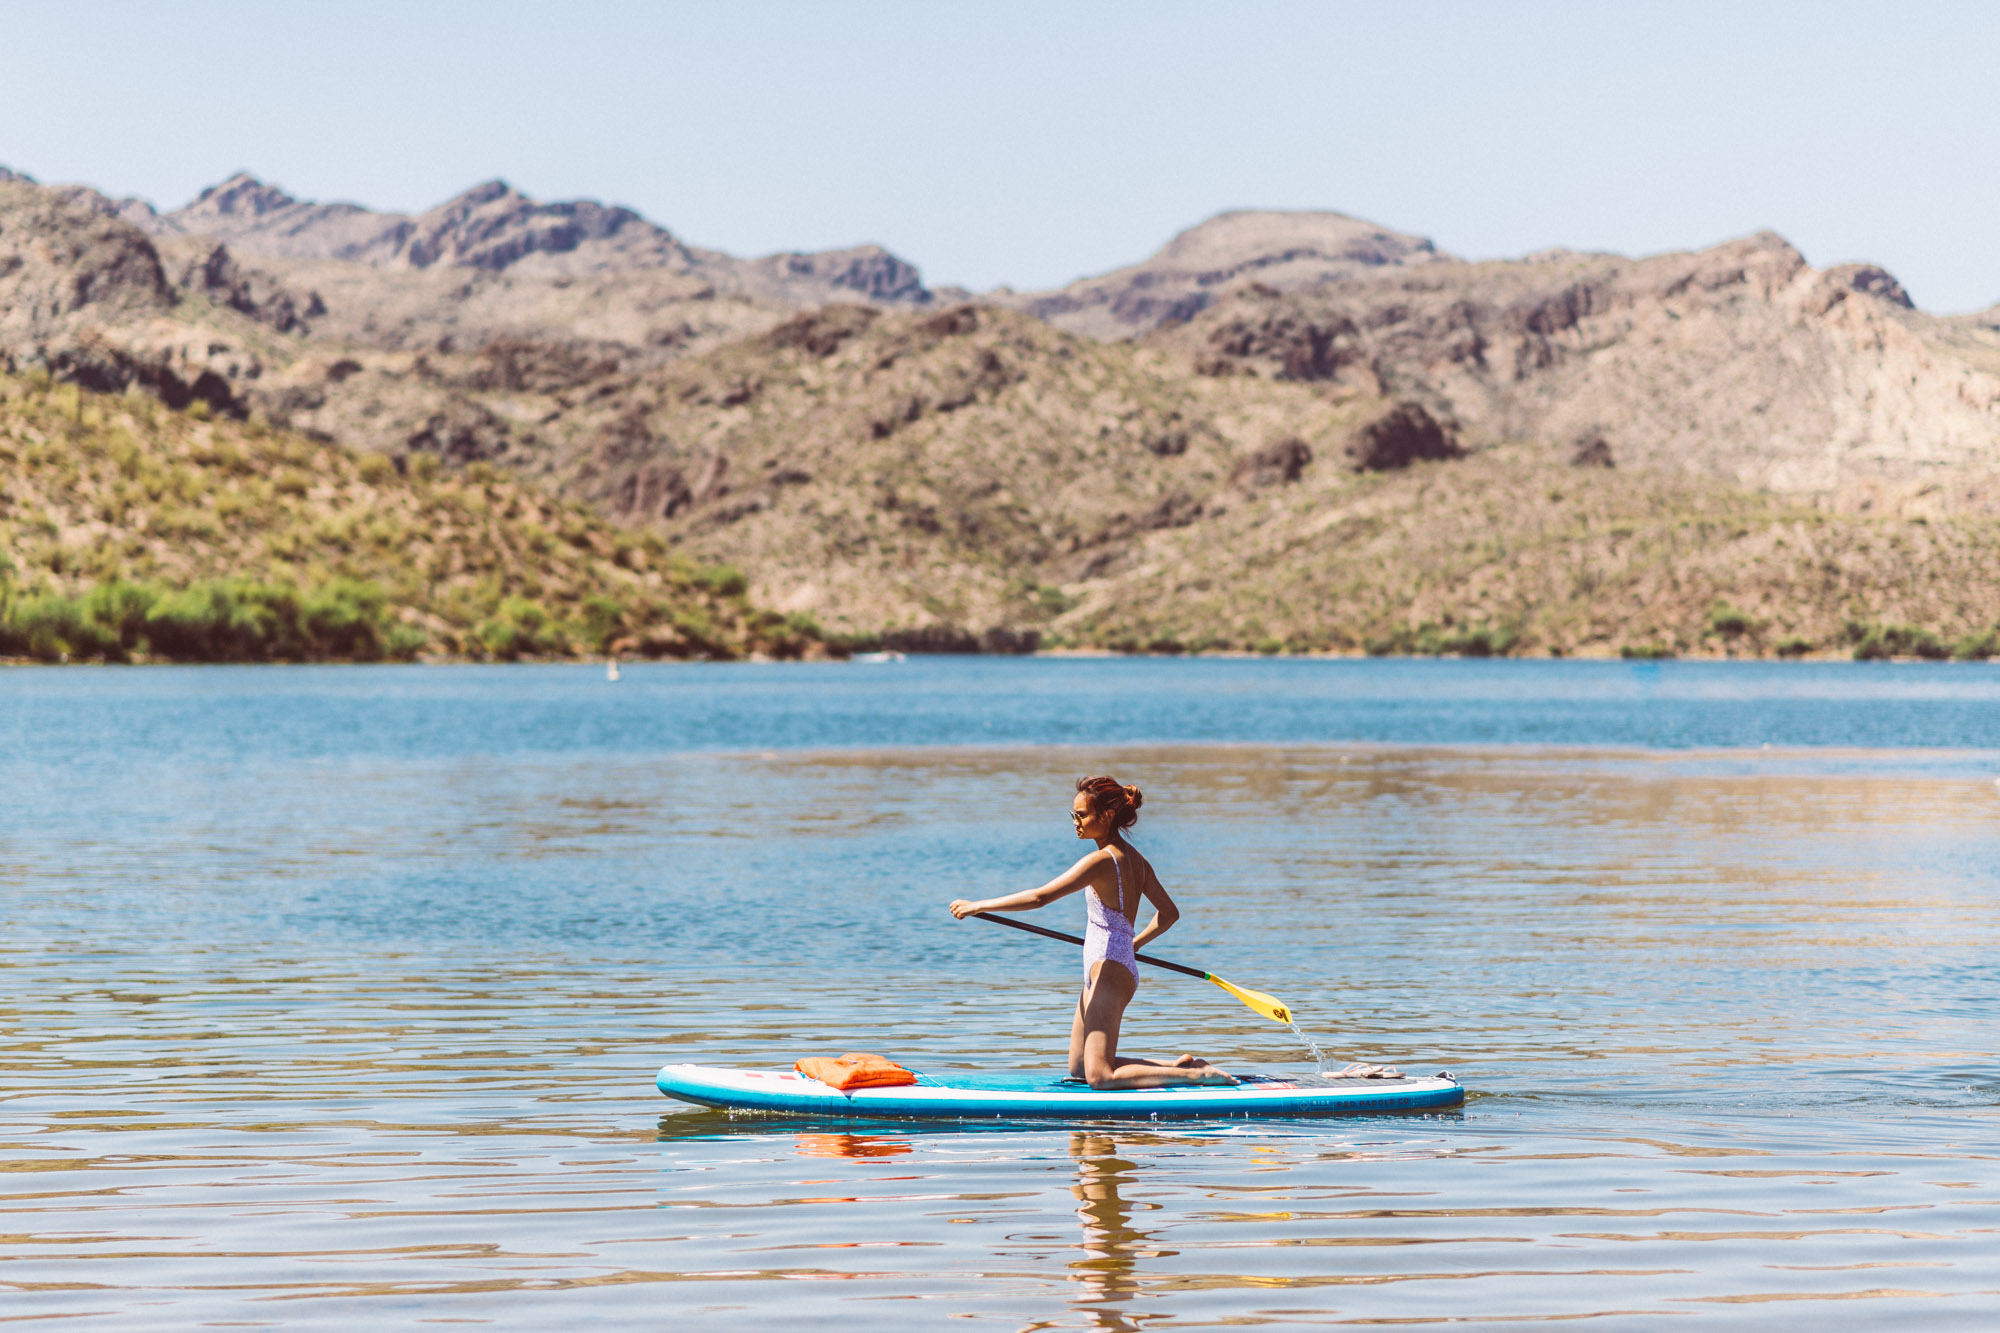 Things To Do In Phoenix — No Snow SUP Stand Up Paddleboard — Jeff On The Road — All photos are under Copyright  © 2019 Jeff Frenette Photography / dezjeff. To use the photos, please contact me at dezjeff@me.com.